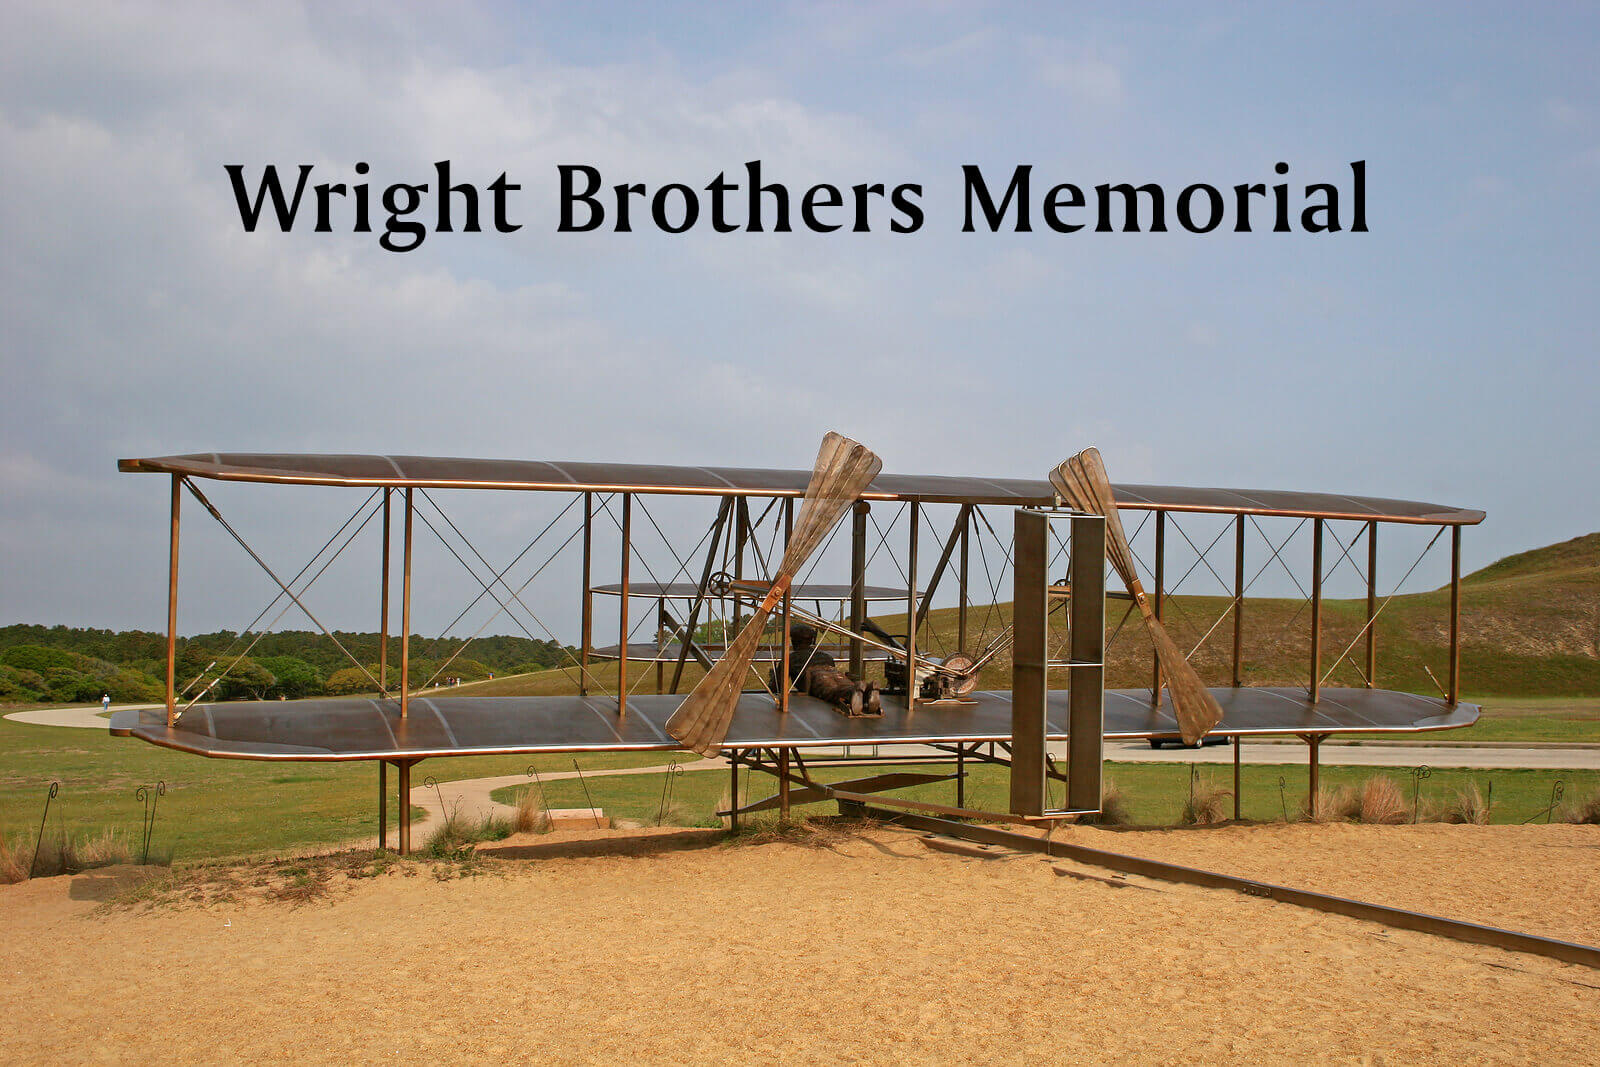 10 Facts About Wilbur Wright and Orville Wright » Almanac » Surfnetkids